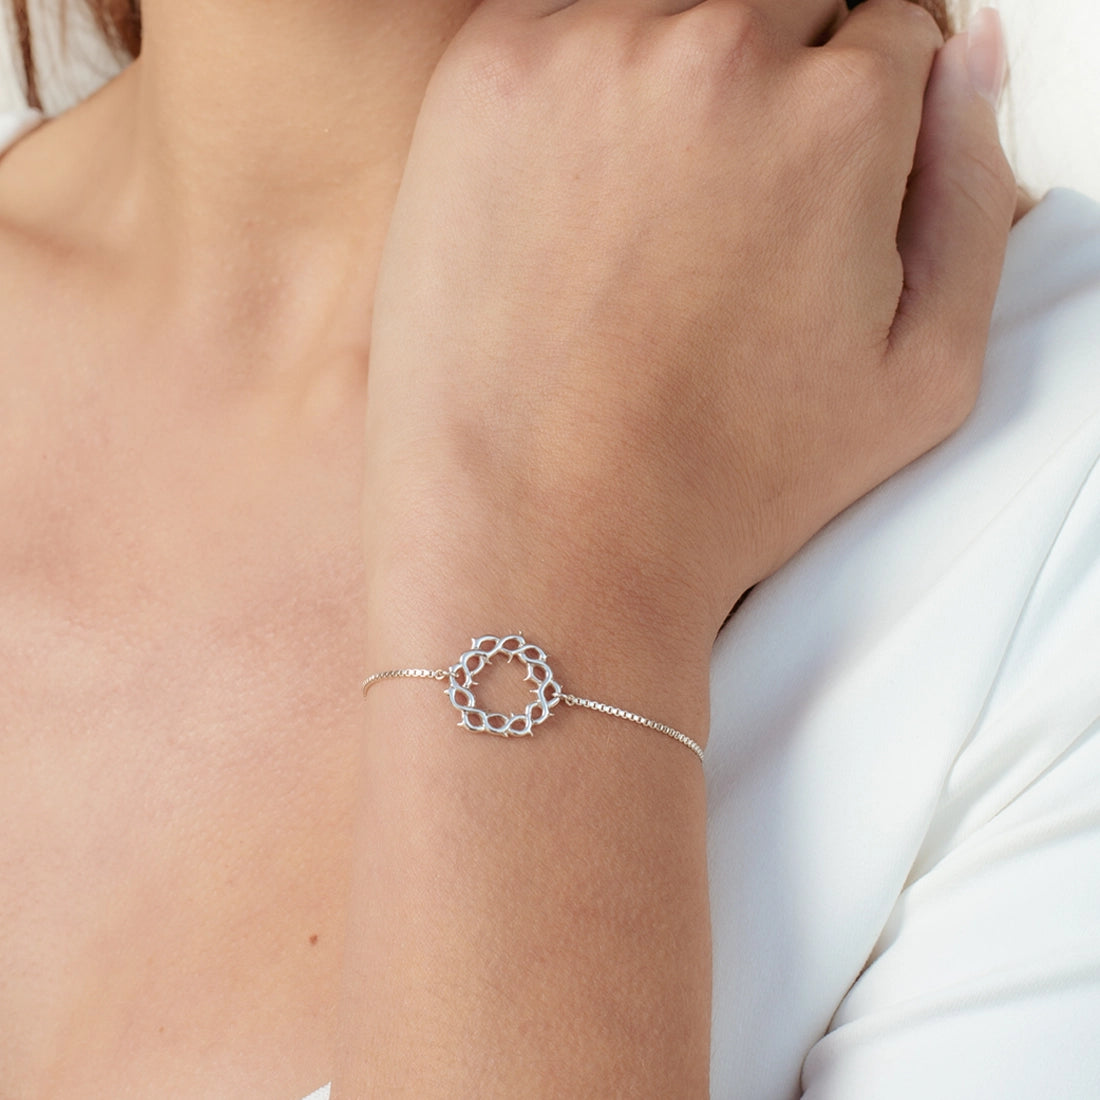 Christian woman wearing silver Crown of Thorns Bracelet from the Insignia Collection by Rizen Jewelry.